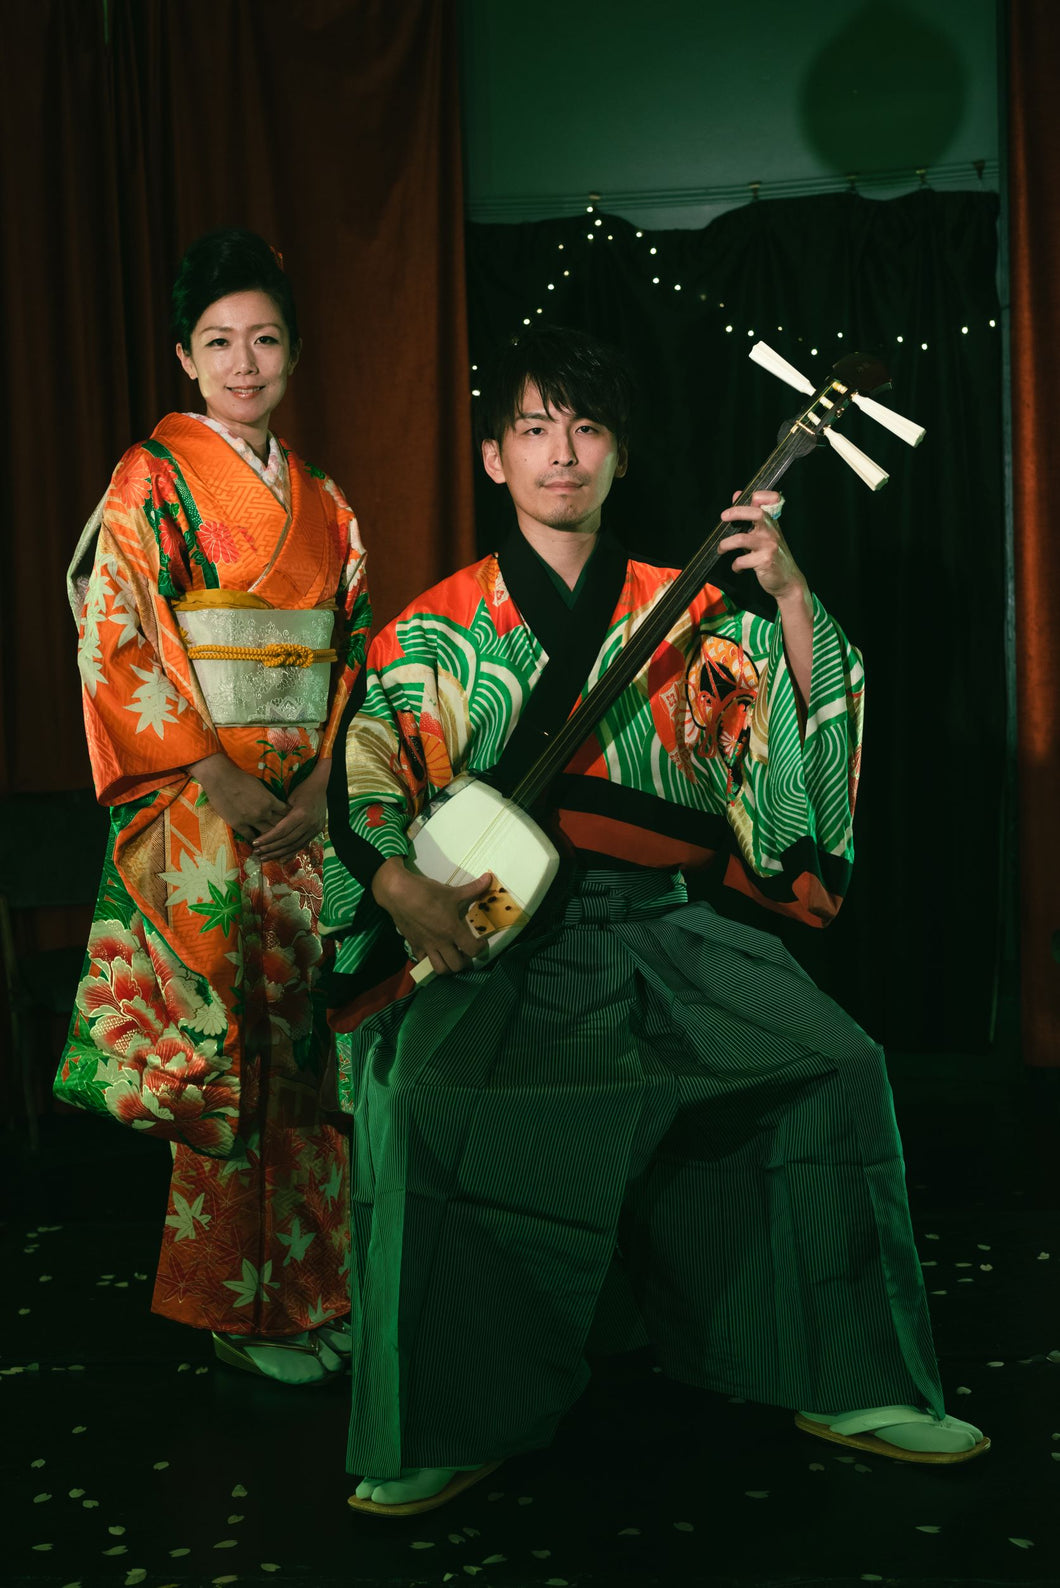 An evening of Traditional Japanese Music of Shamisen and Minyo